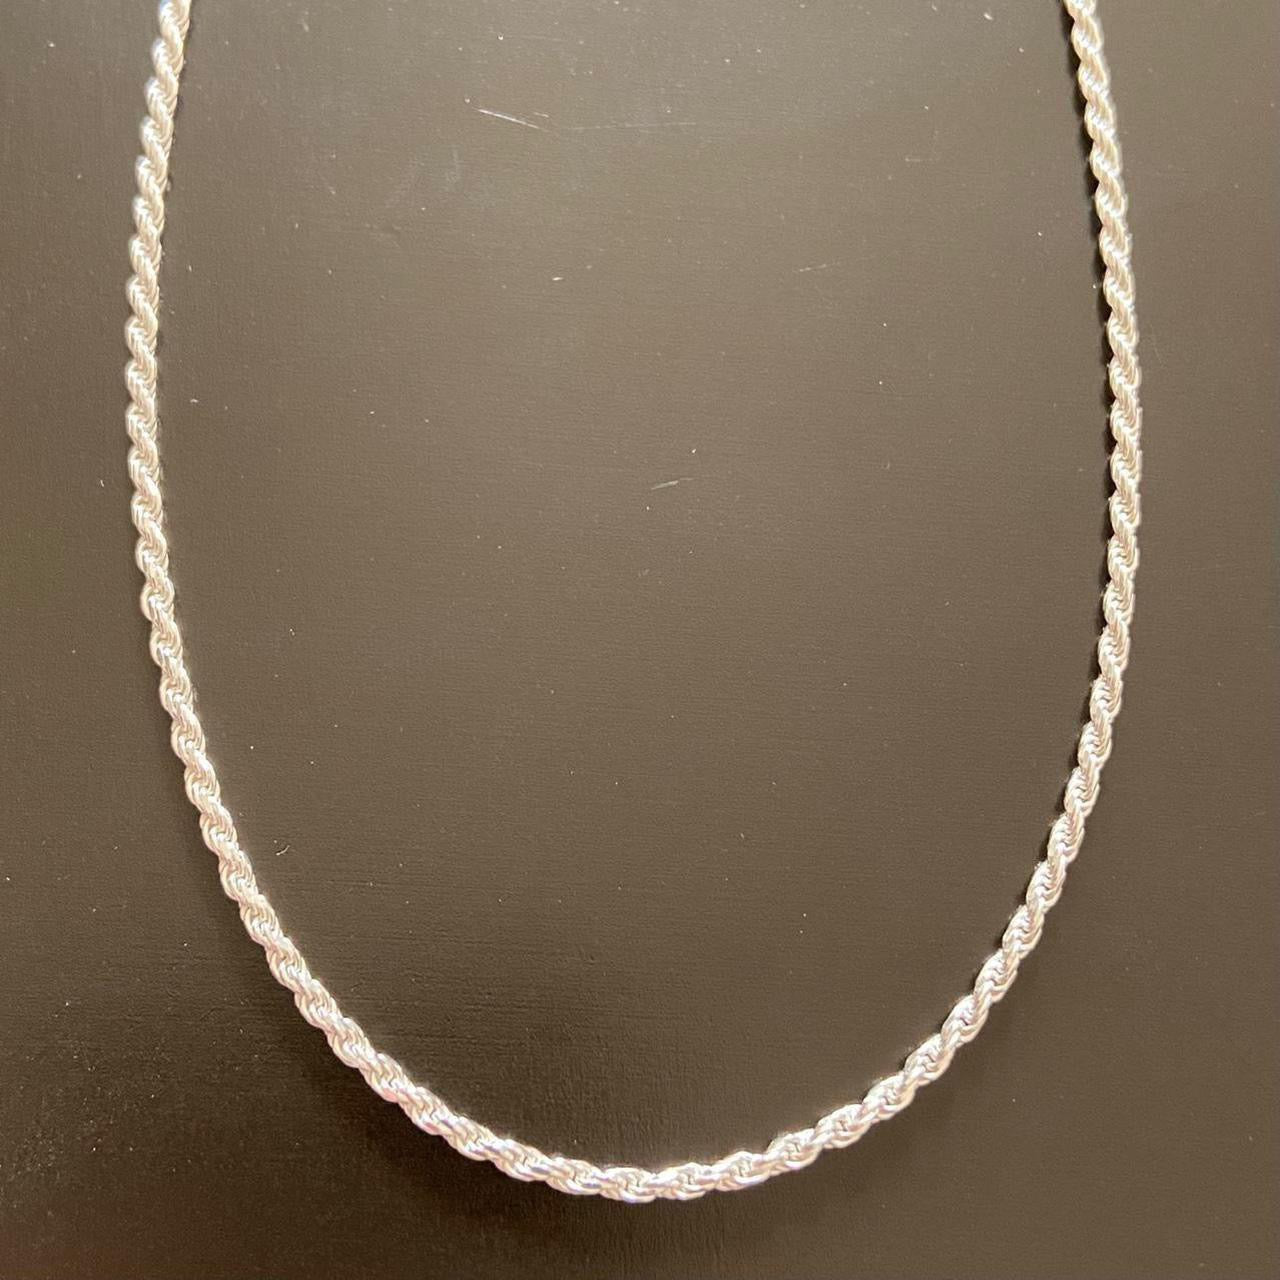 Solid Silver Rope Chain 22in 2mm